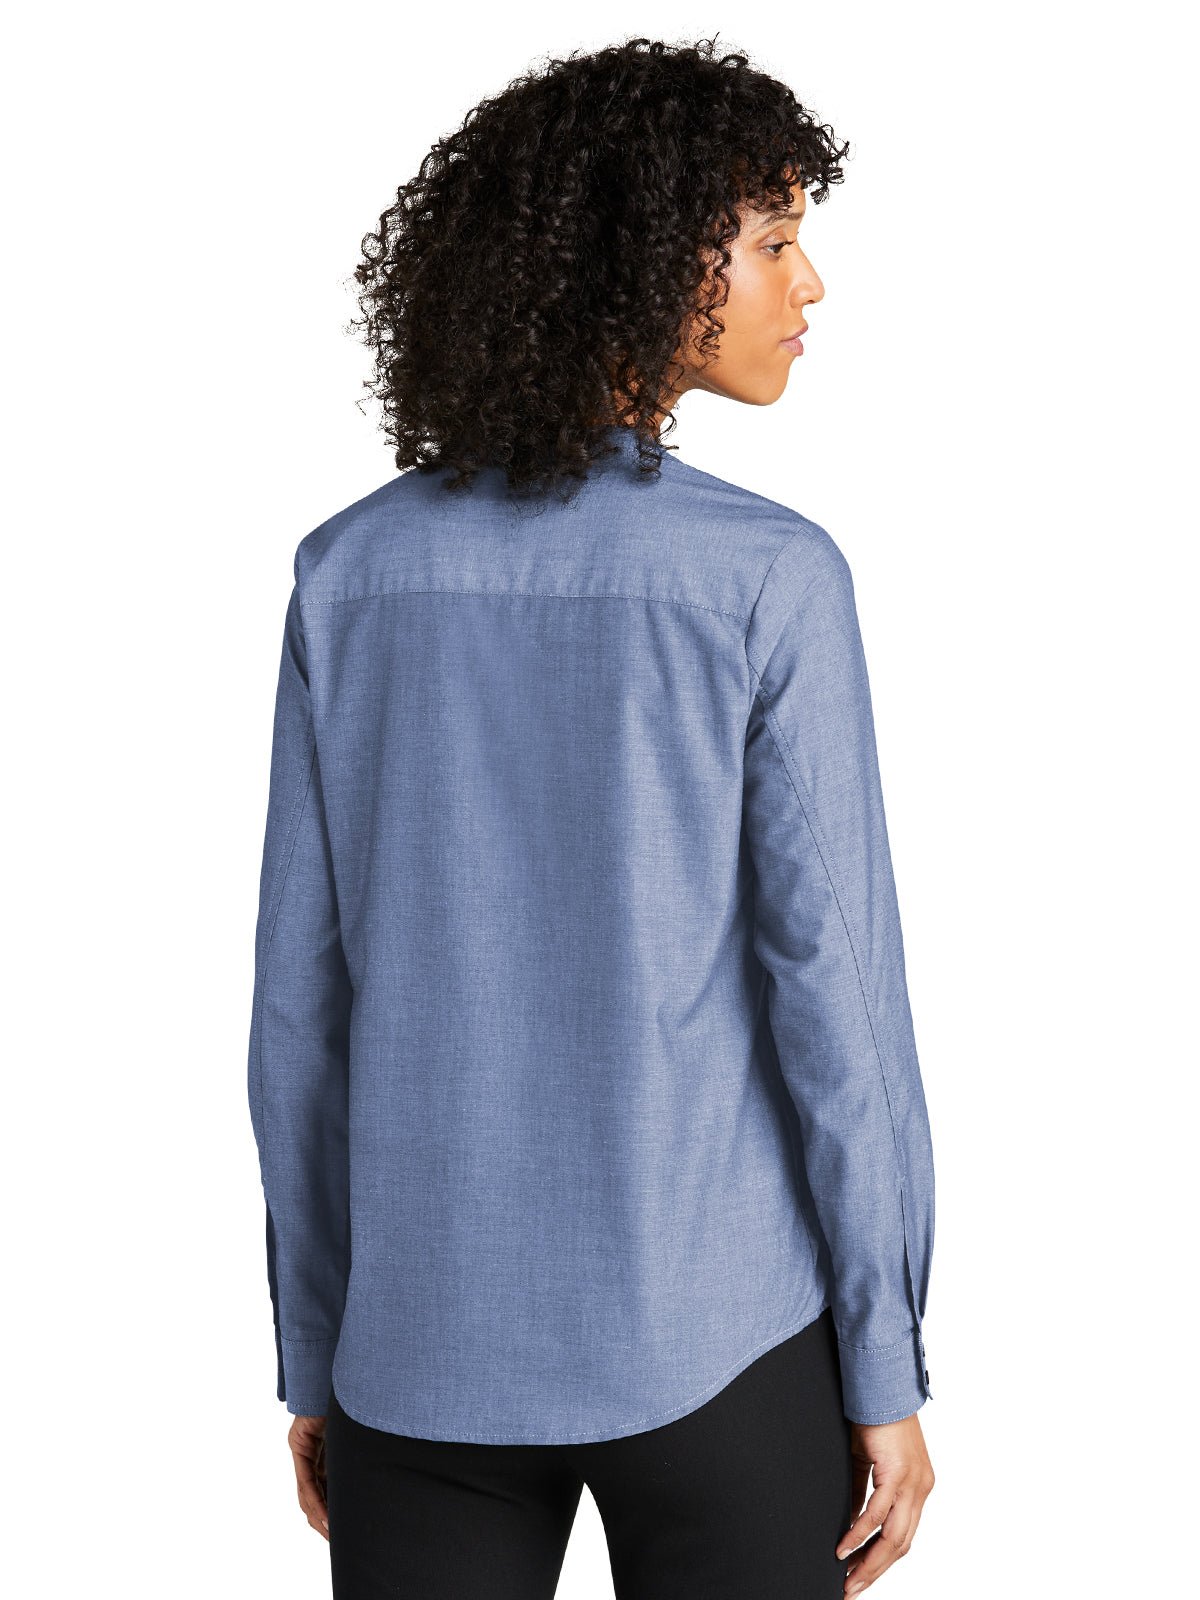 Women's Easy Care Chambray Shirt